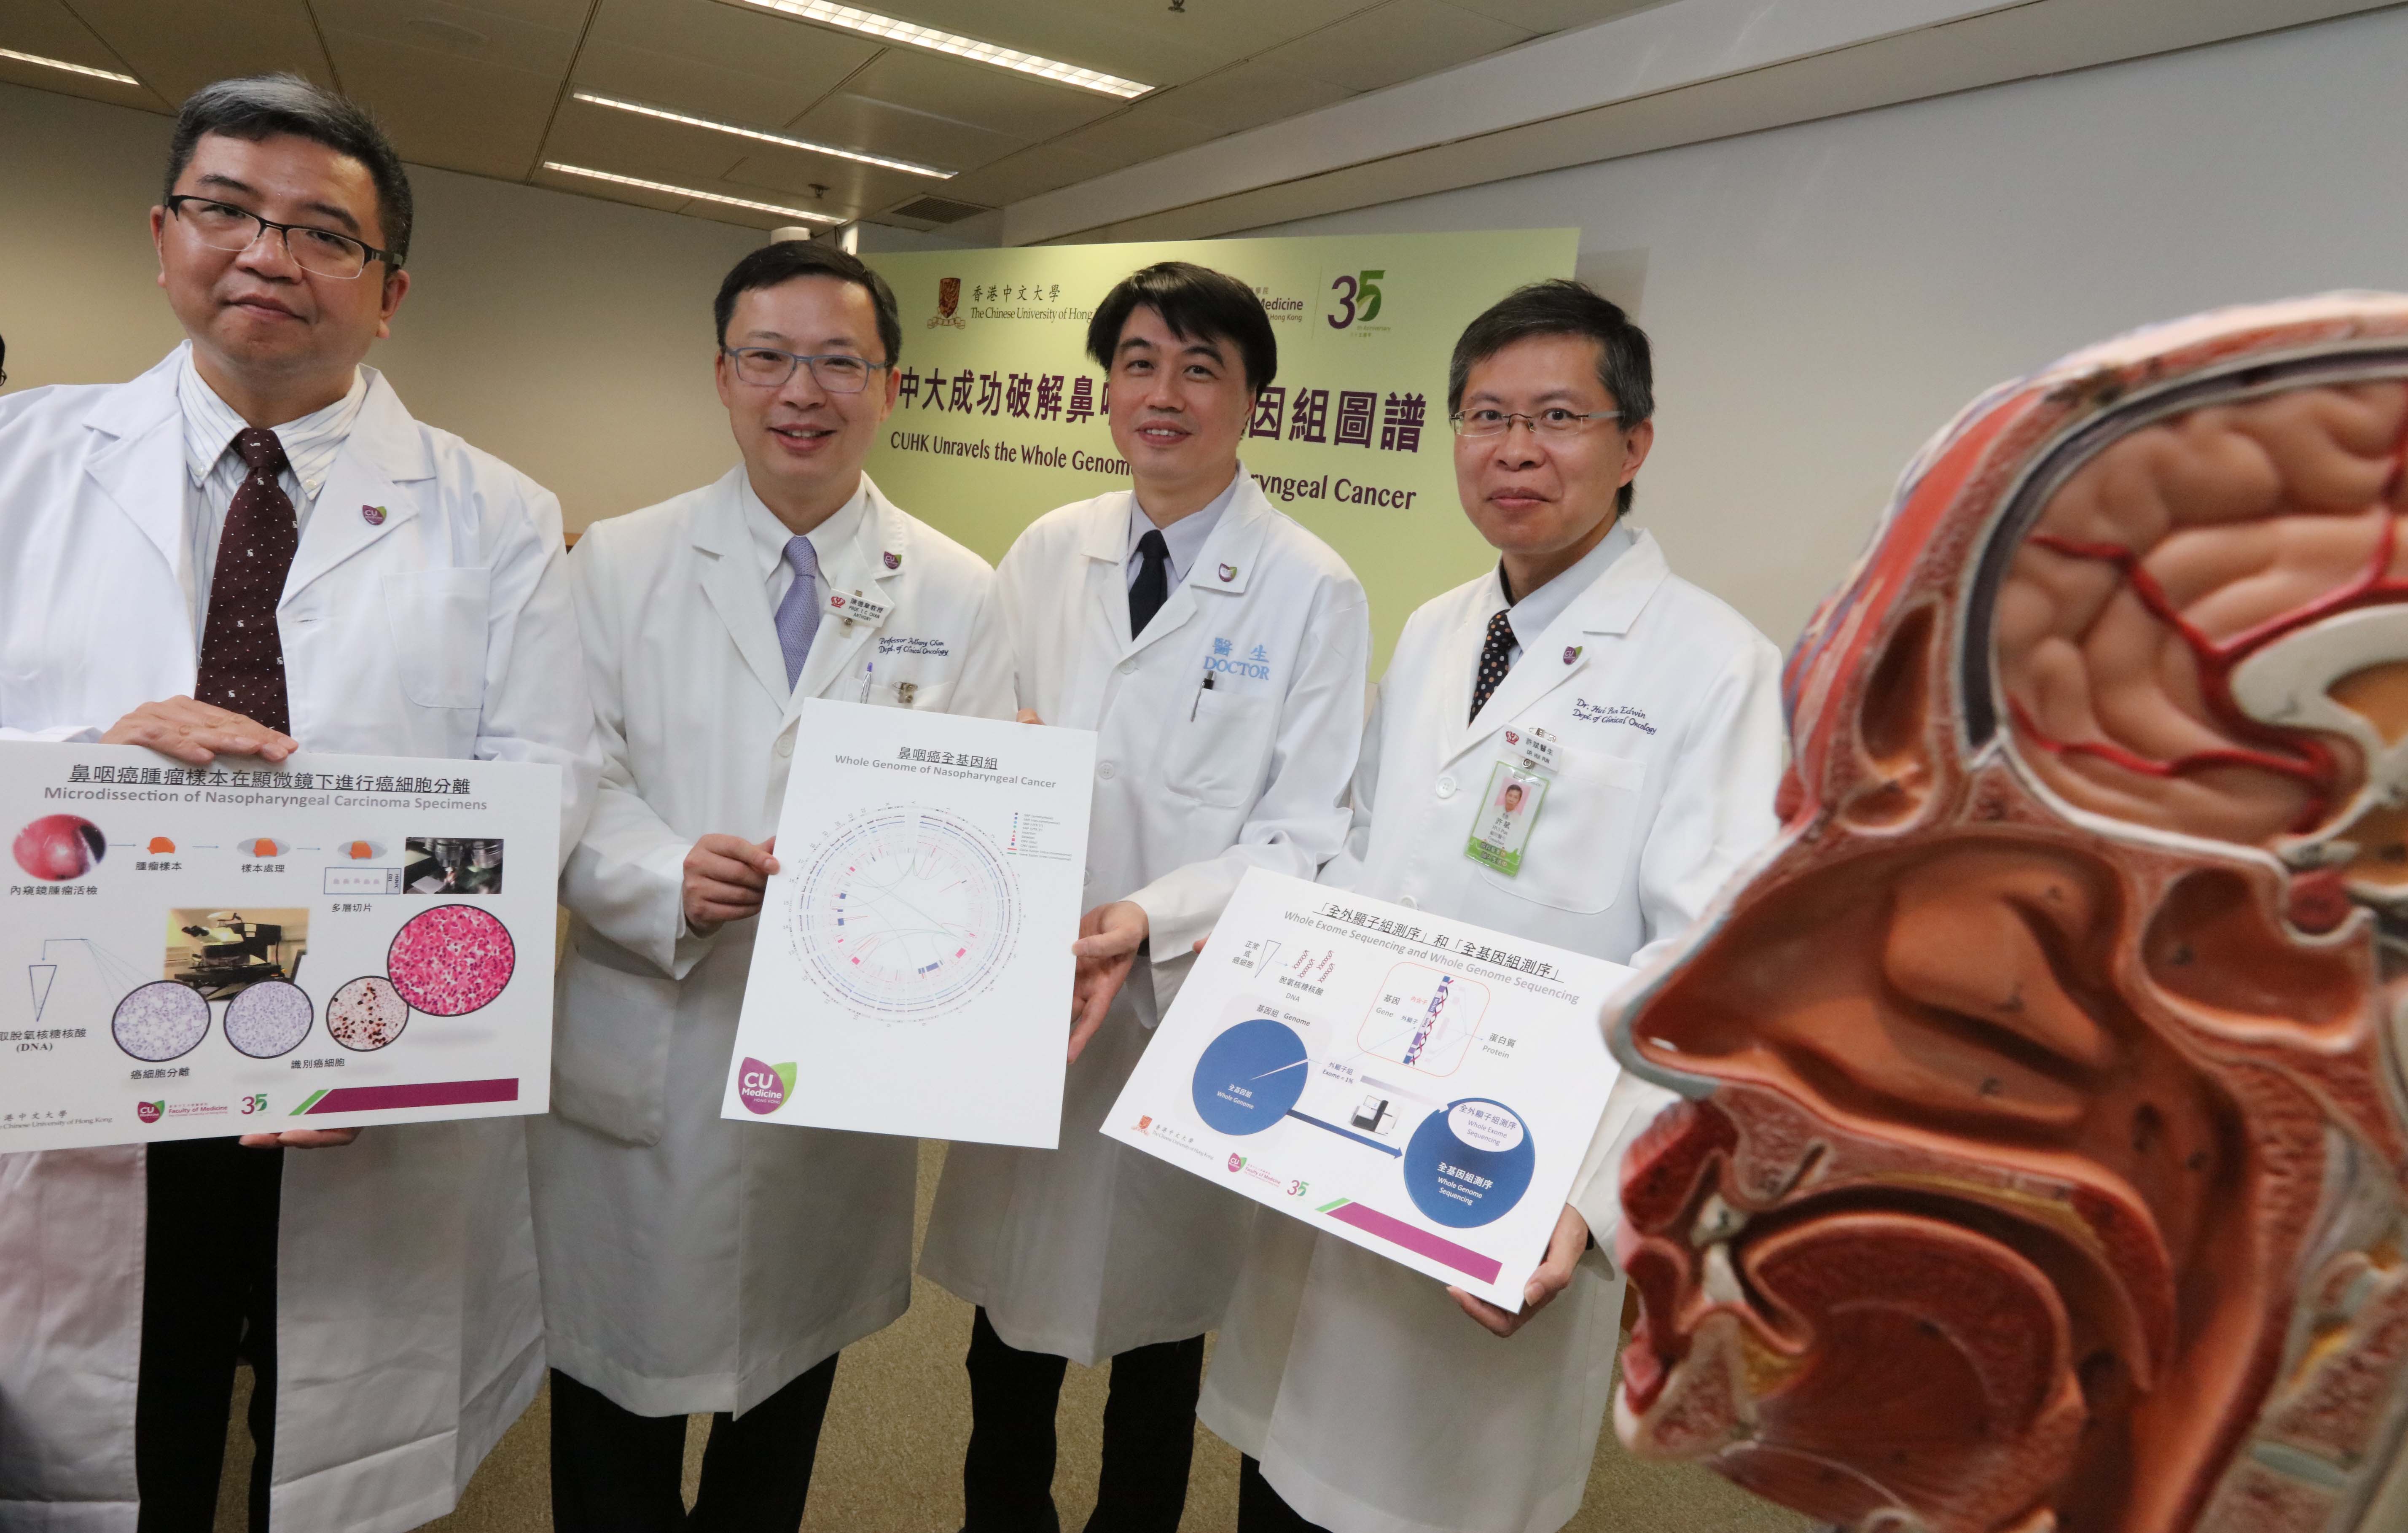 CUHK research team conducted a systematic study to unravel the whole genome of nasopharyngeal carcinoma. The groundbreaking findings will facilitate the development of personalized medicine. (From left) Prof. LO Kwok Wai, Department of Anatomical and Cellular Pathology, Faculty of Medicine; Prof. Anthony CHAN, Li Shu Fan Medical Foundation Professor of Clinical Oncology at CUHK; Prof. TO Ka Fai, Chairman of the Department of Anatomical and Cellular Pathology, Faculty of Medicine; and Dr. HUI Pun, Clinical Associate Professor (honorary), Department of Clinical Oncology, Faculty of Medicine. 